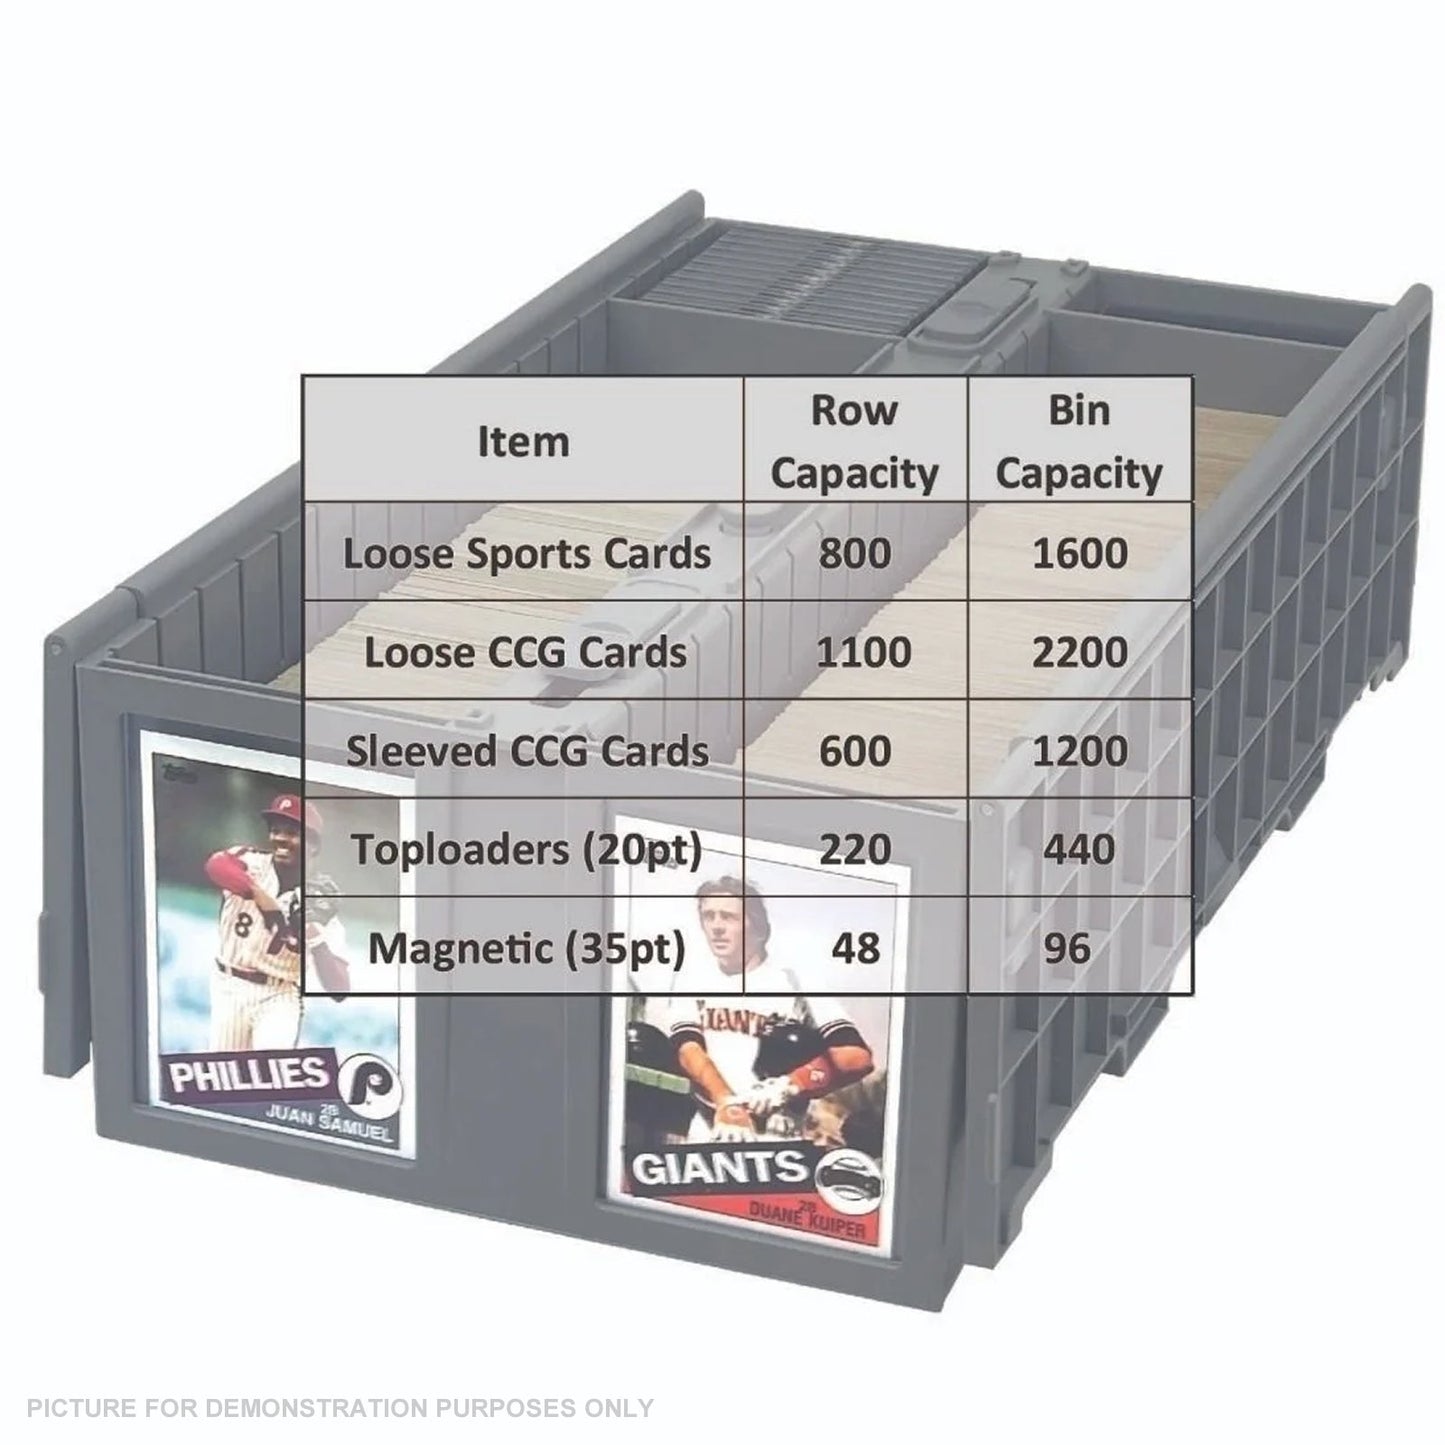 BCW Collectible Card Bin 1600 Count - GREY